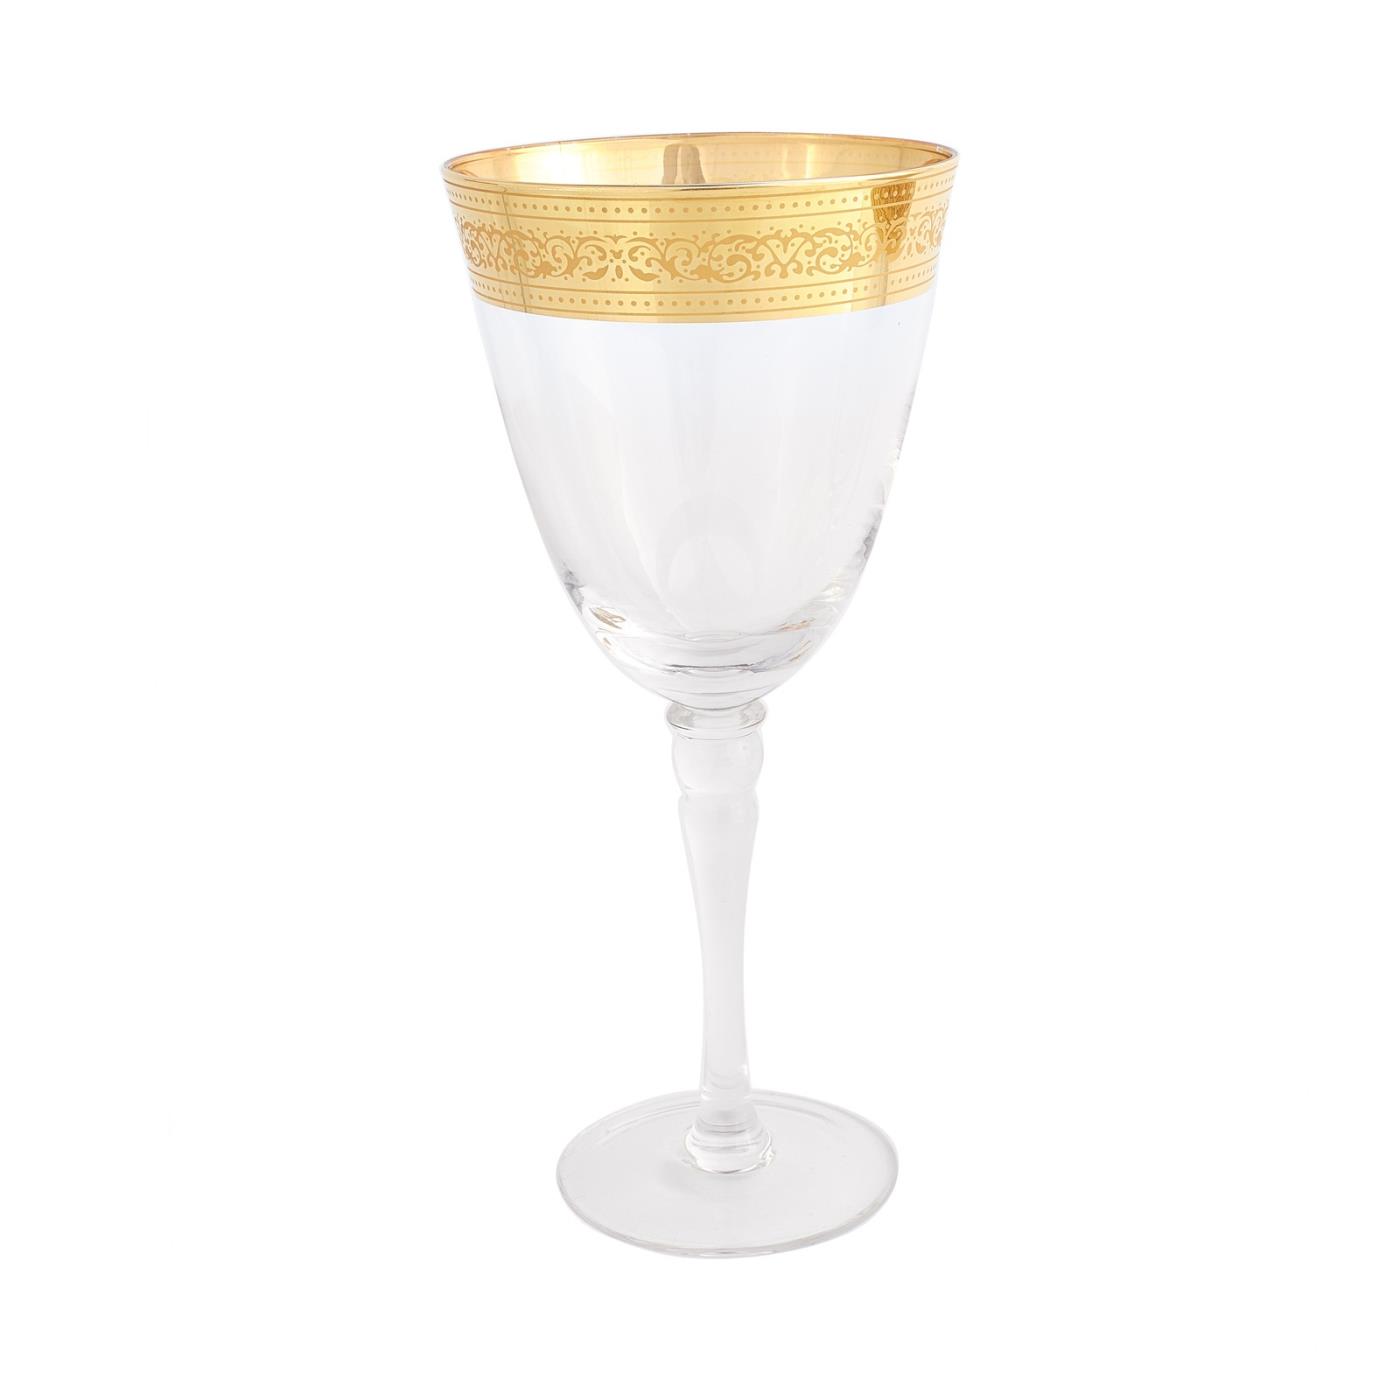 Majestic Gold Collection -  Red Wine Glass 10 oz